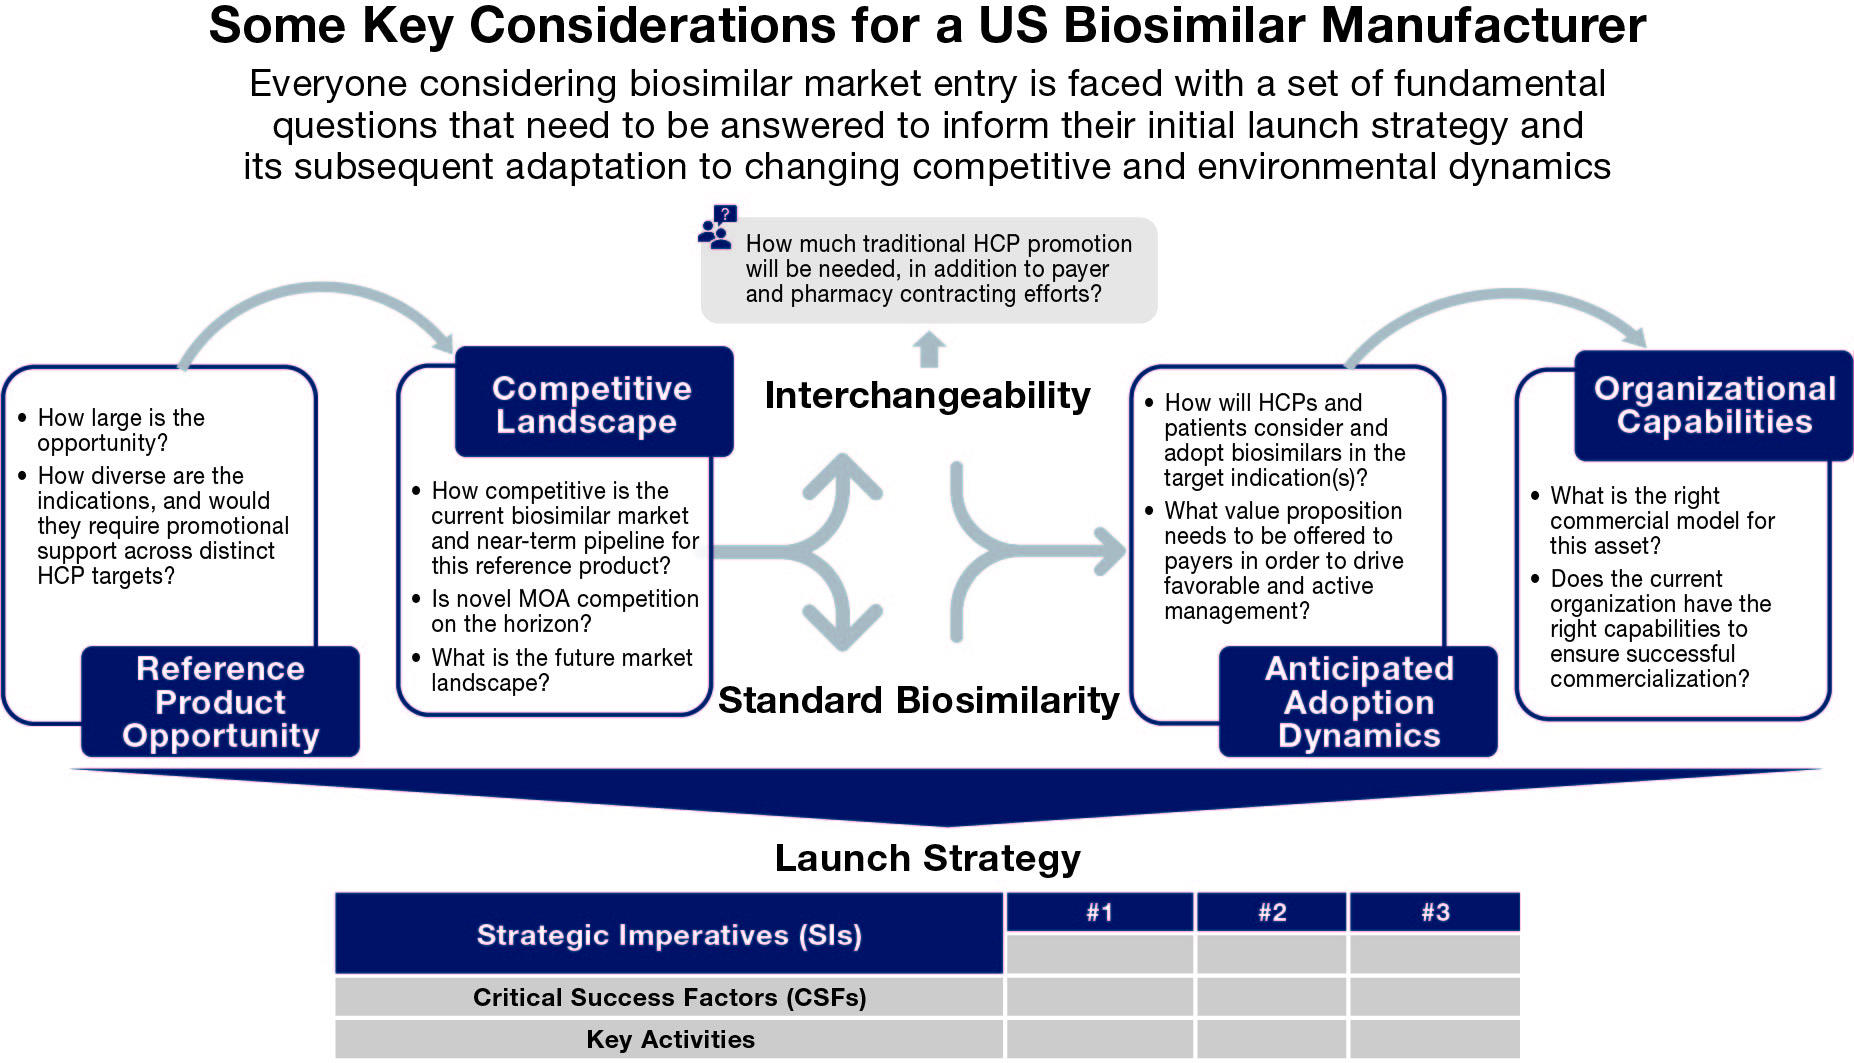 Some key considerations for Biosimilar Manufacturers in the US